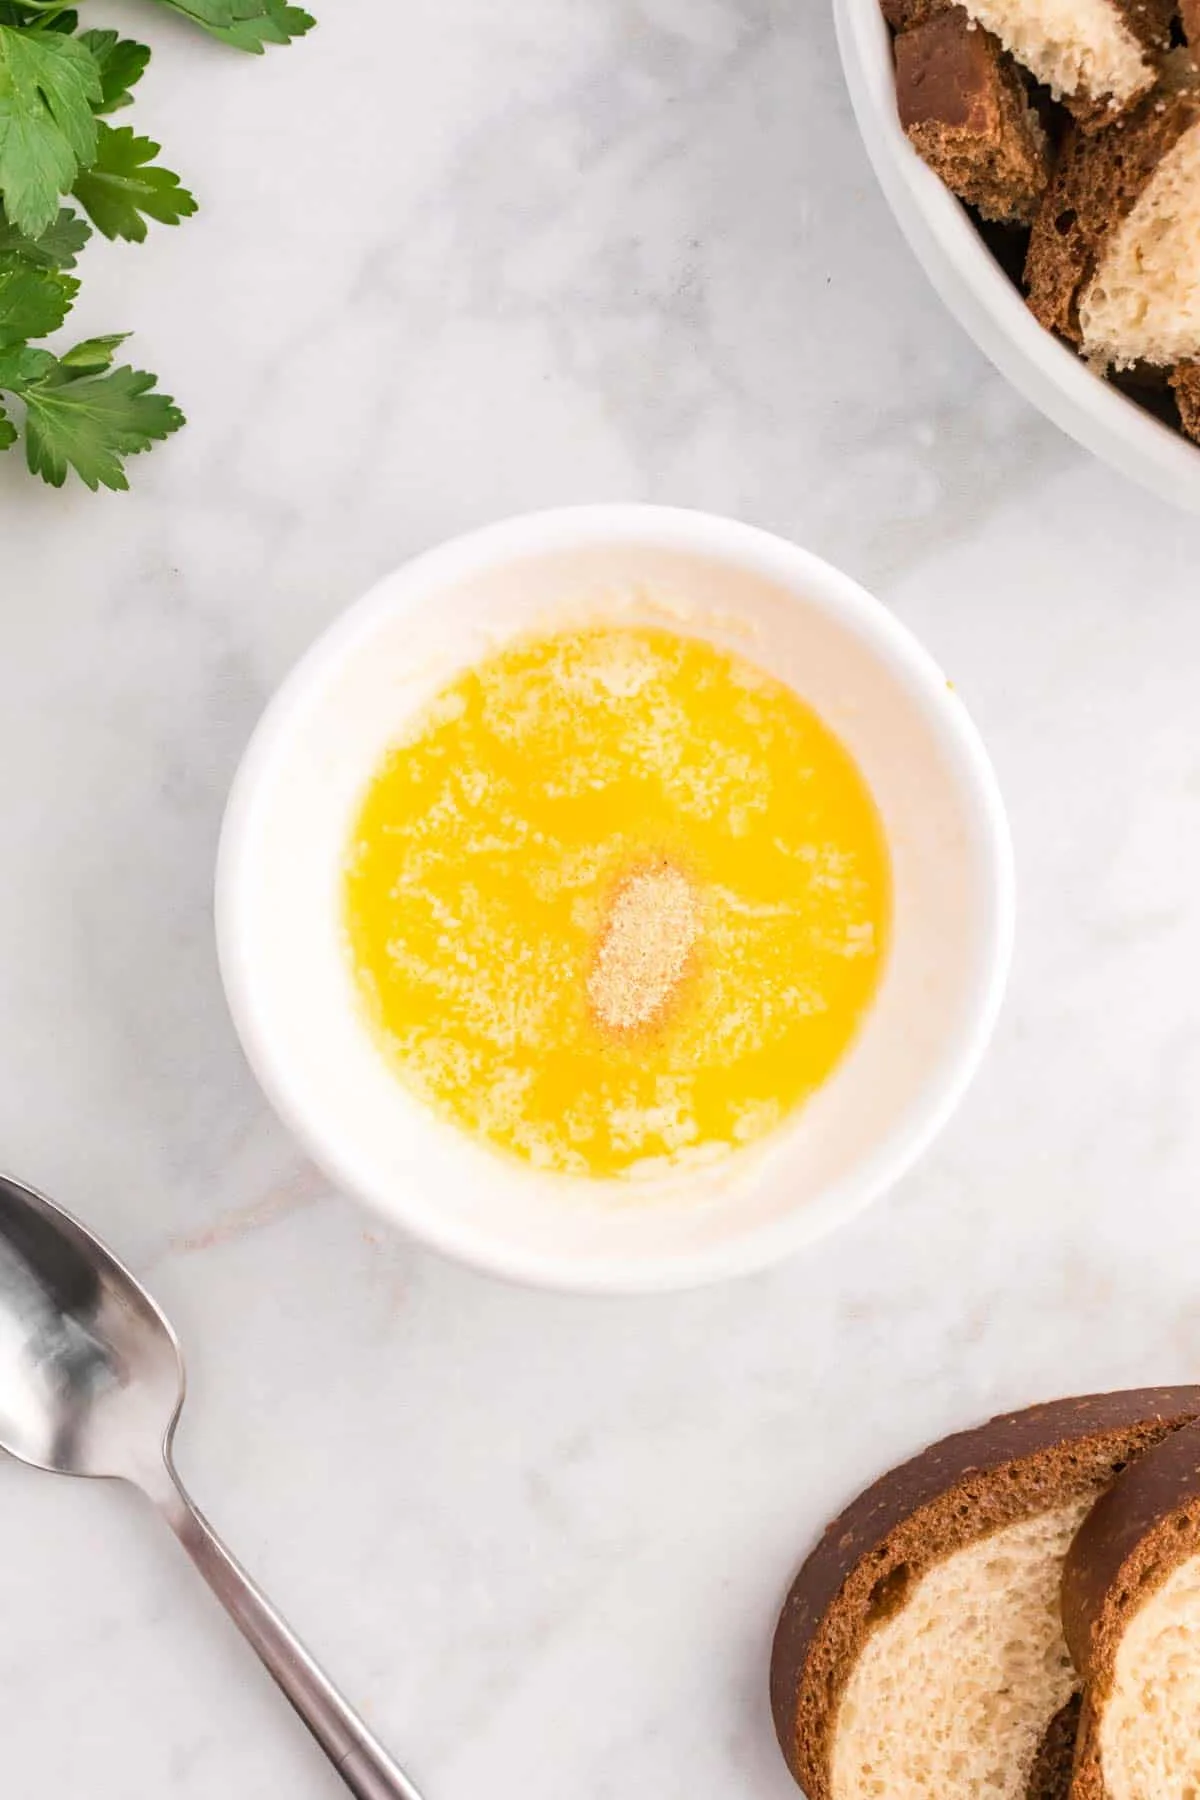 melted butter and garlic powder in a bowl